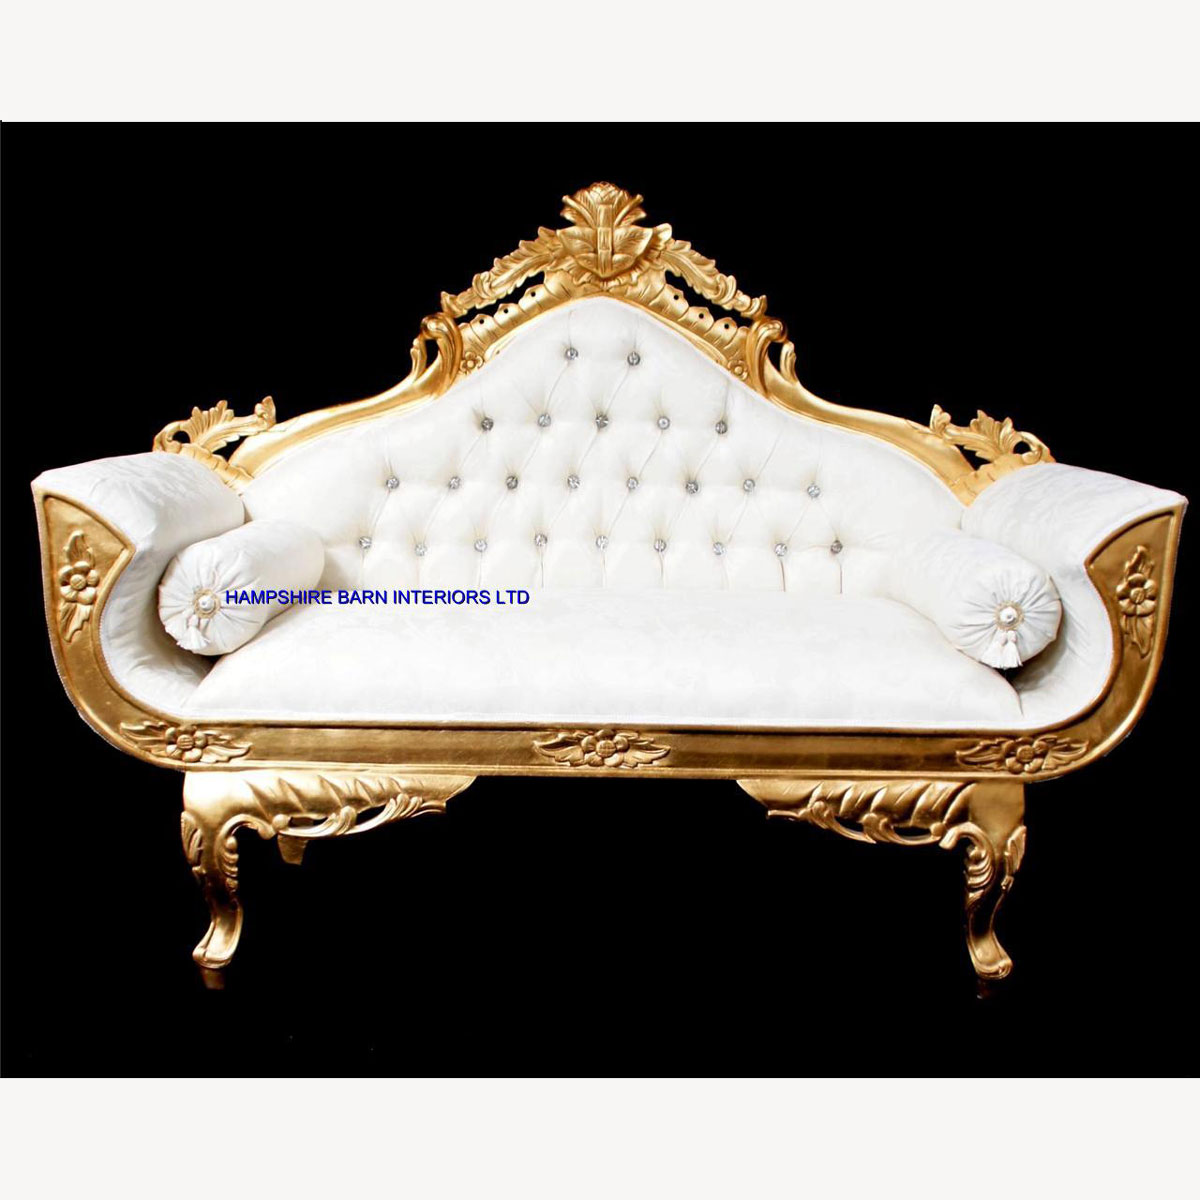 Ornate Palace Wedding Sofa In Gold Leaf Frame And Ivory Cream Fabric With Crystal Buttons 2 - Hampshire Barn Interiors - Ornate Palace Wedding Sofa In Gold Leaf Frame And Ivory Cream Fabric With Crystal Buttons -